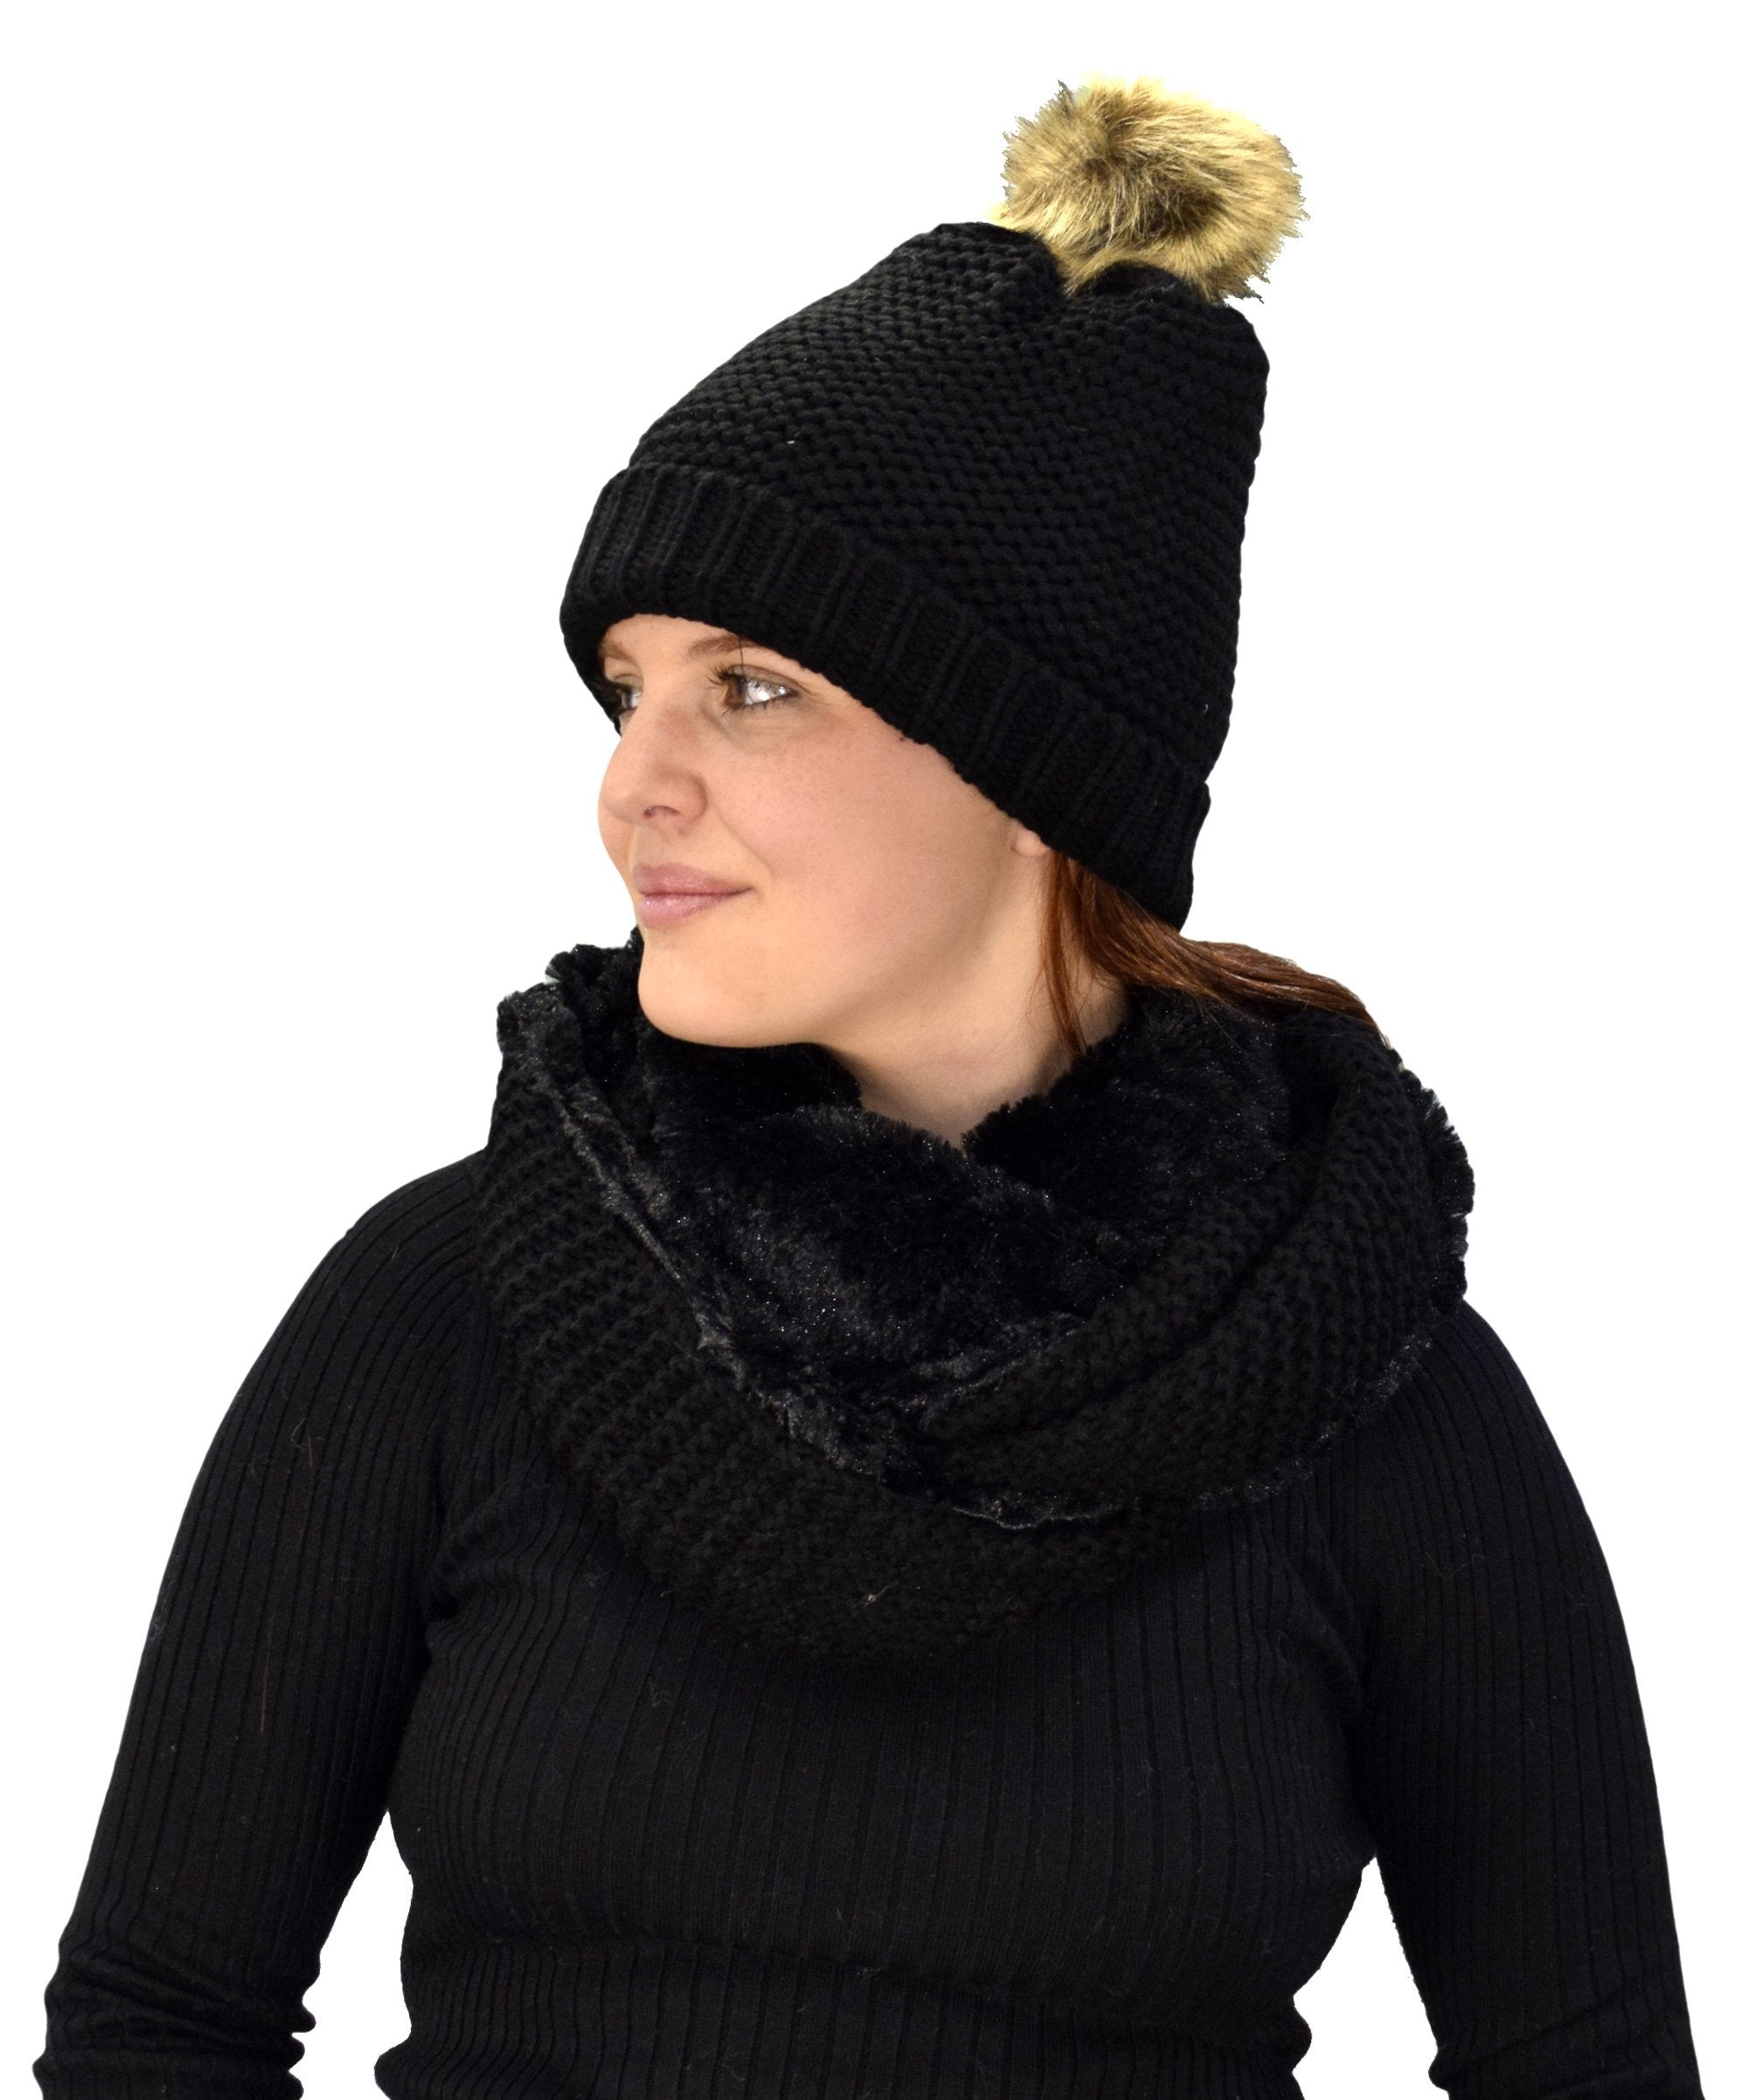 Black Peach Couture Thick Crochet Weave Beanie Hat Plush Infinity Loop Scarf 2 Pack